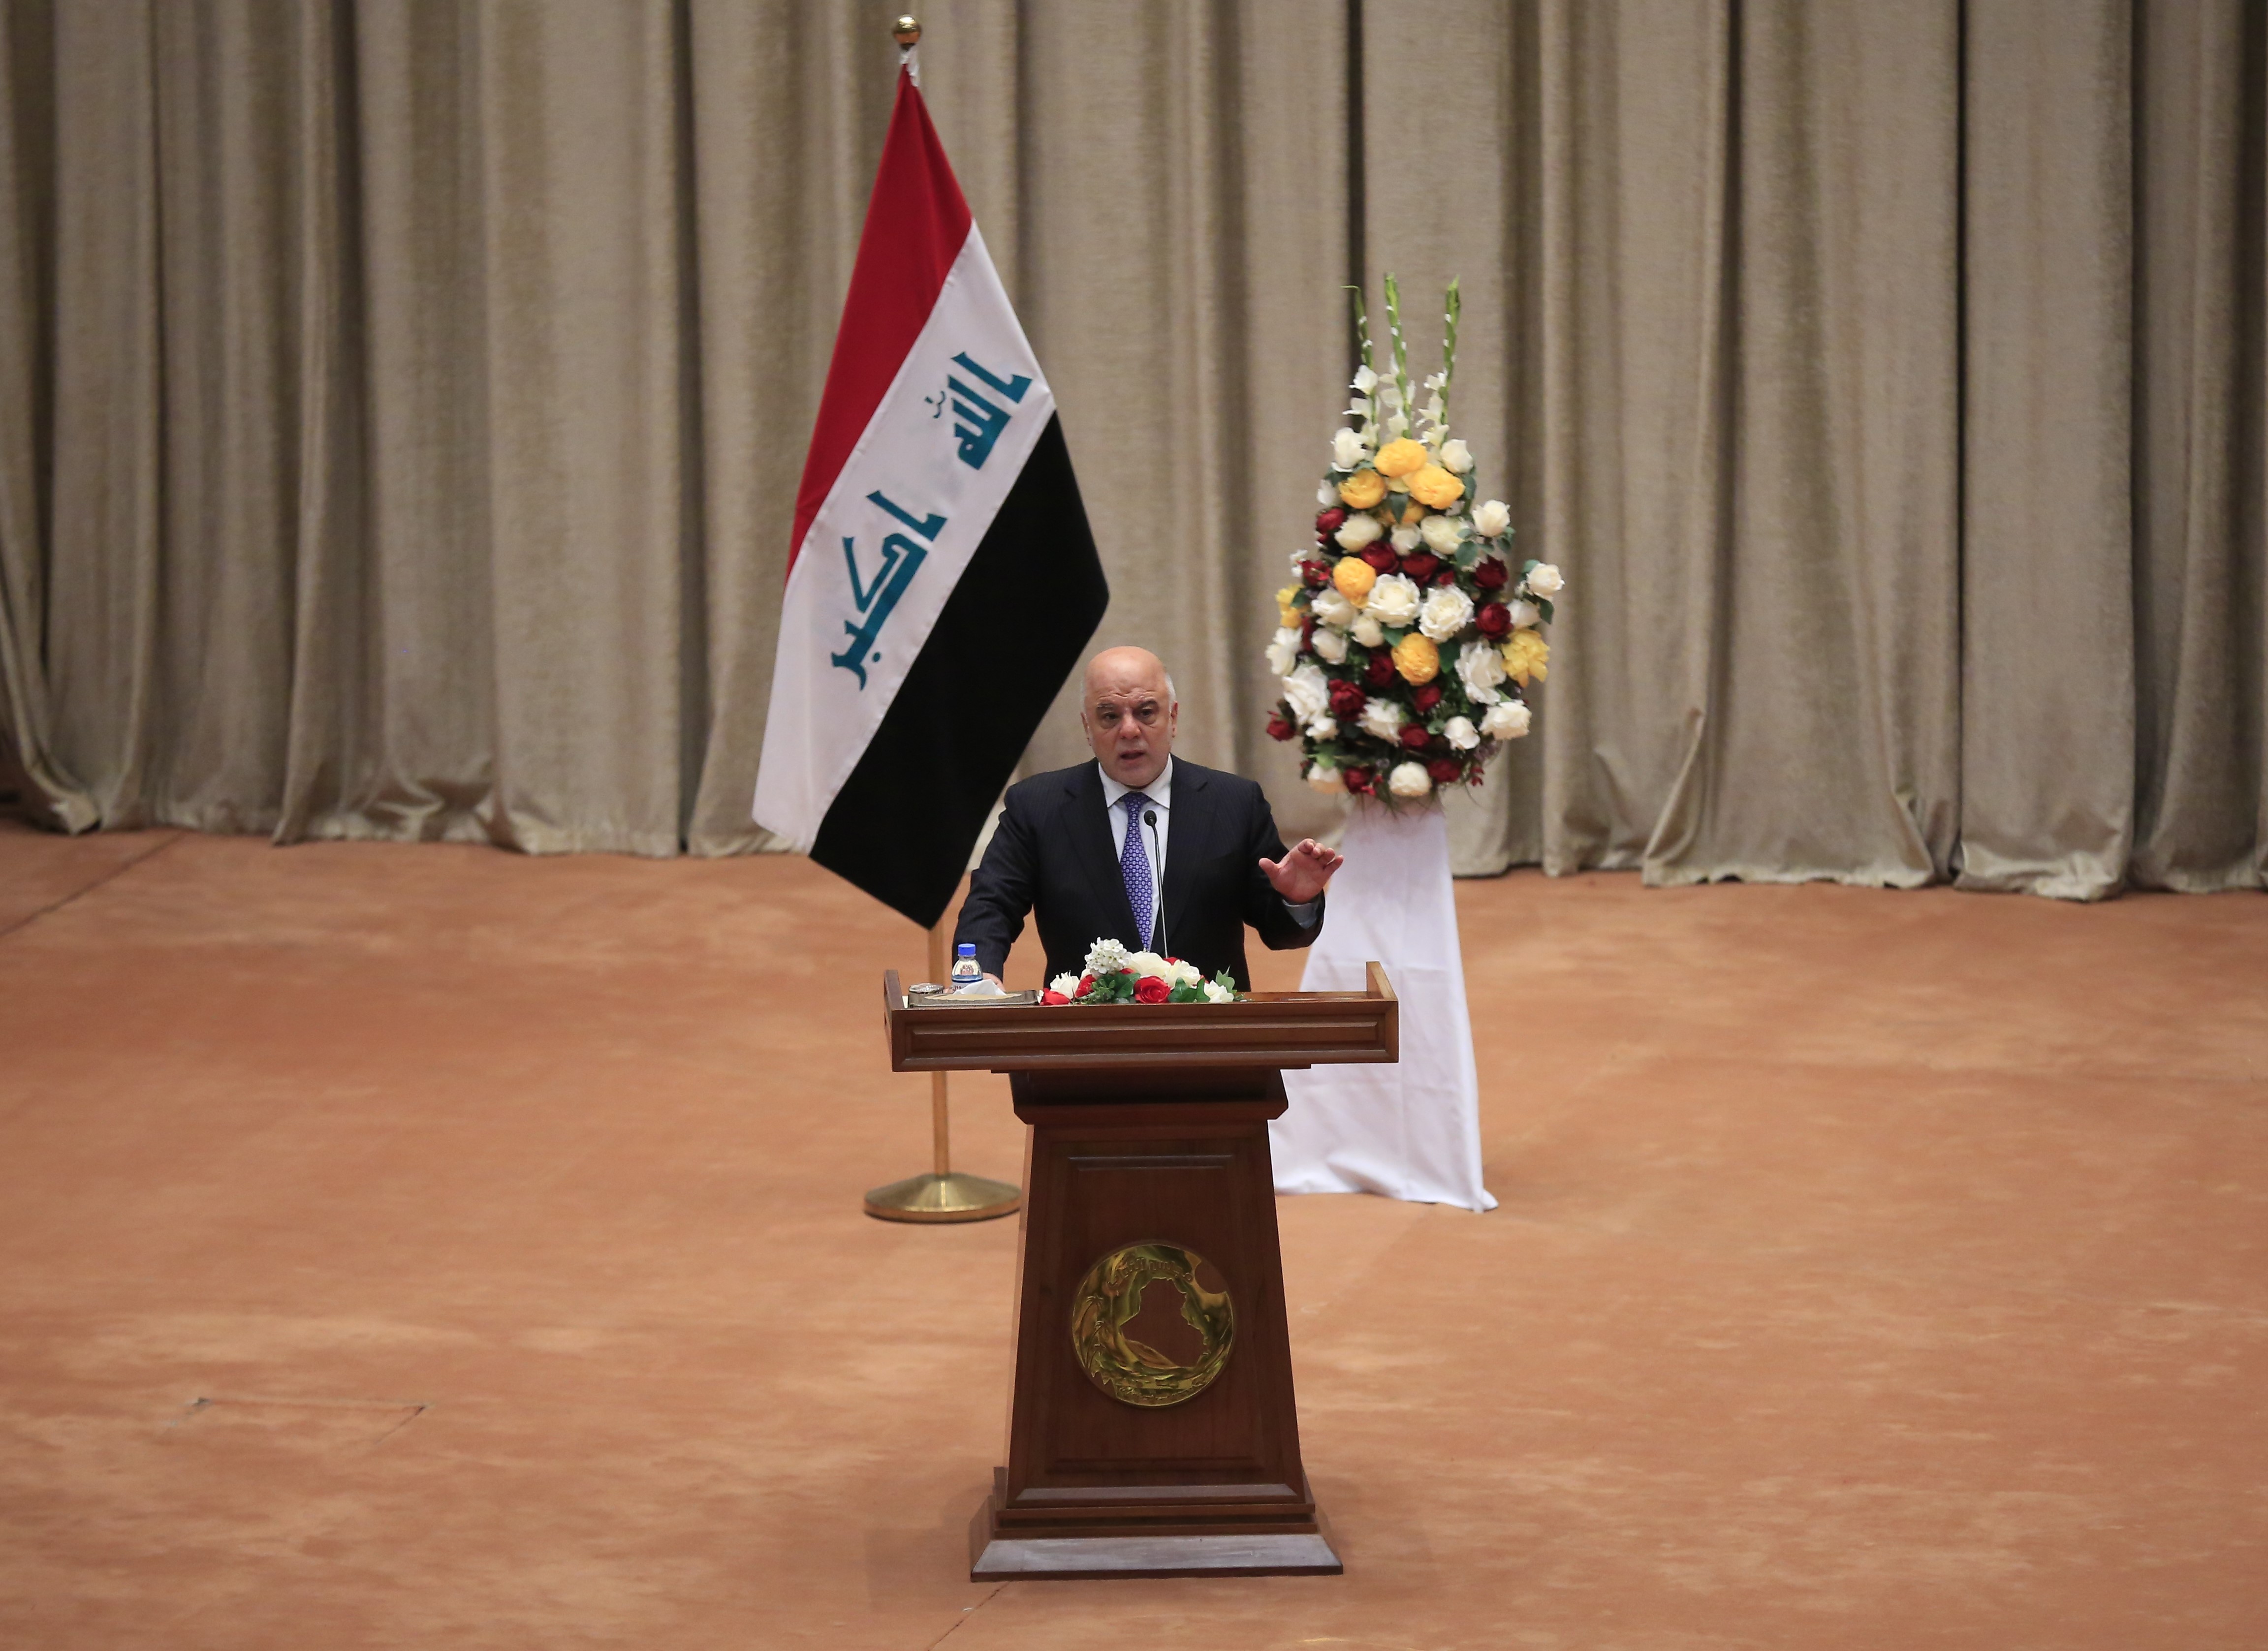 Iraqi Prime Minister Haider al-Abadi delivers a speech during the opening session of New Iraqi parliament at the Parliament Building on Sept. 3, 2018 in Baghdad, Iraq (Anadolu Agency—Getty Images)